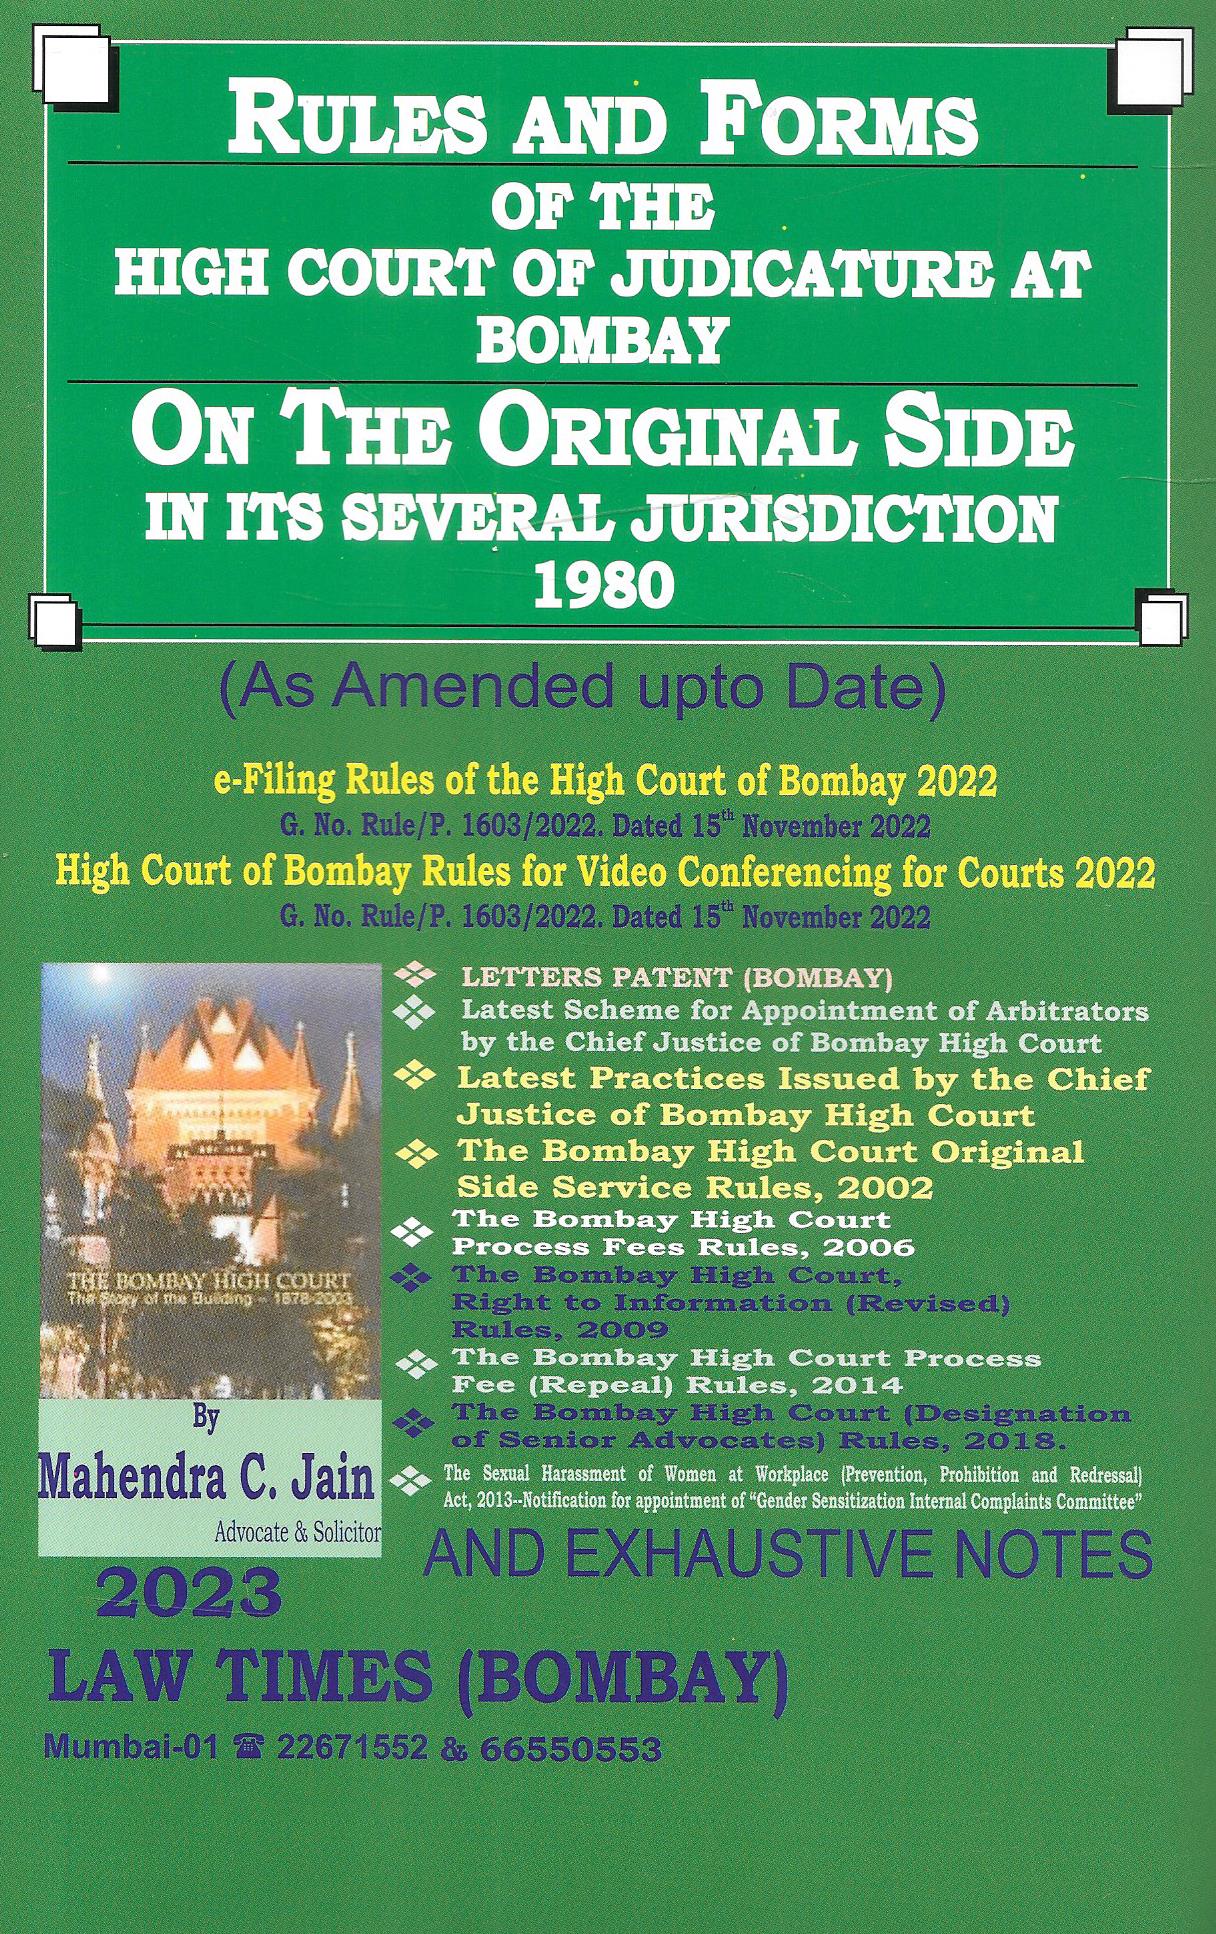 Rules and Forms of the High Court of Judicature at Bombay of the Original Side in its several Jurisdiction 1980